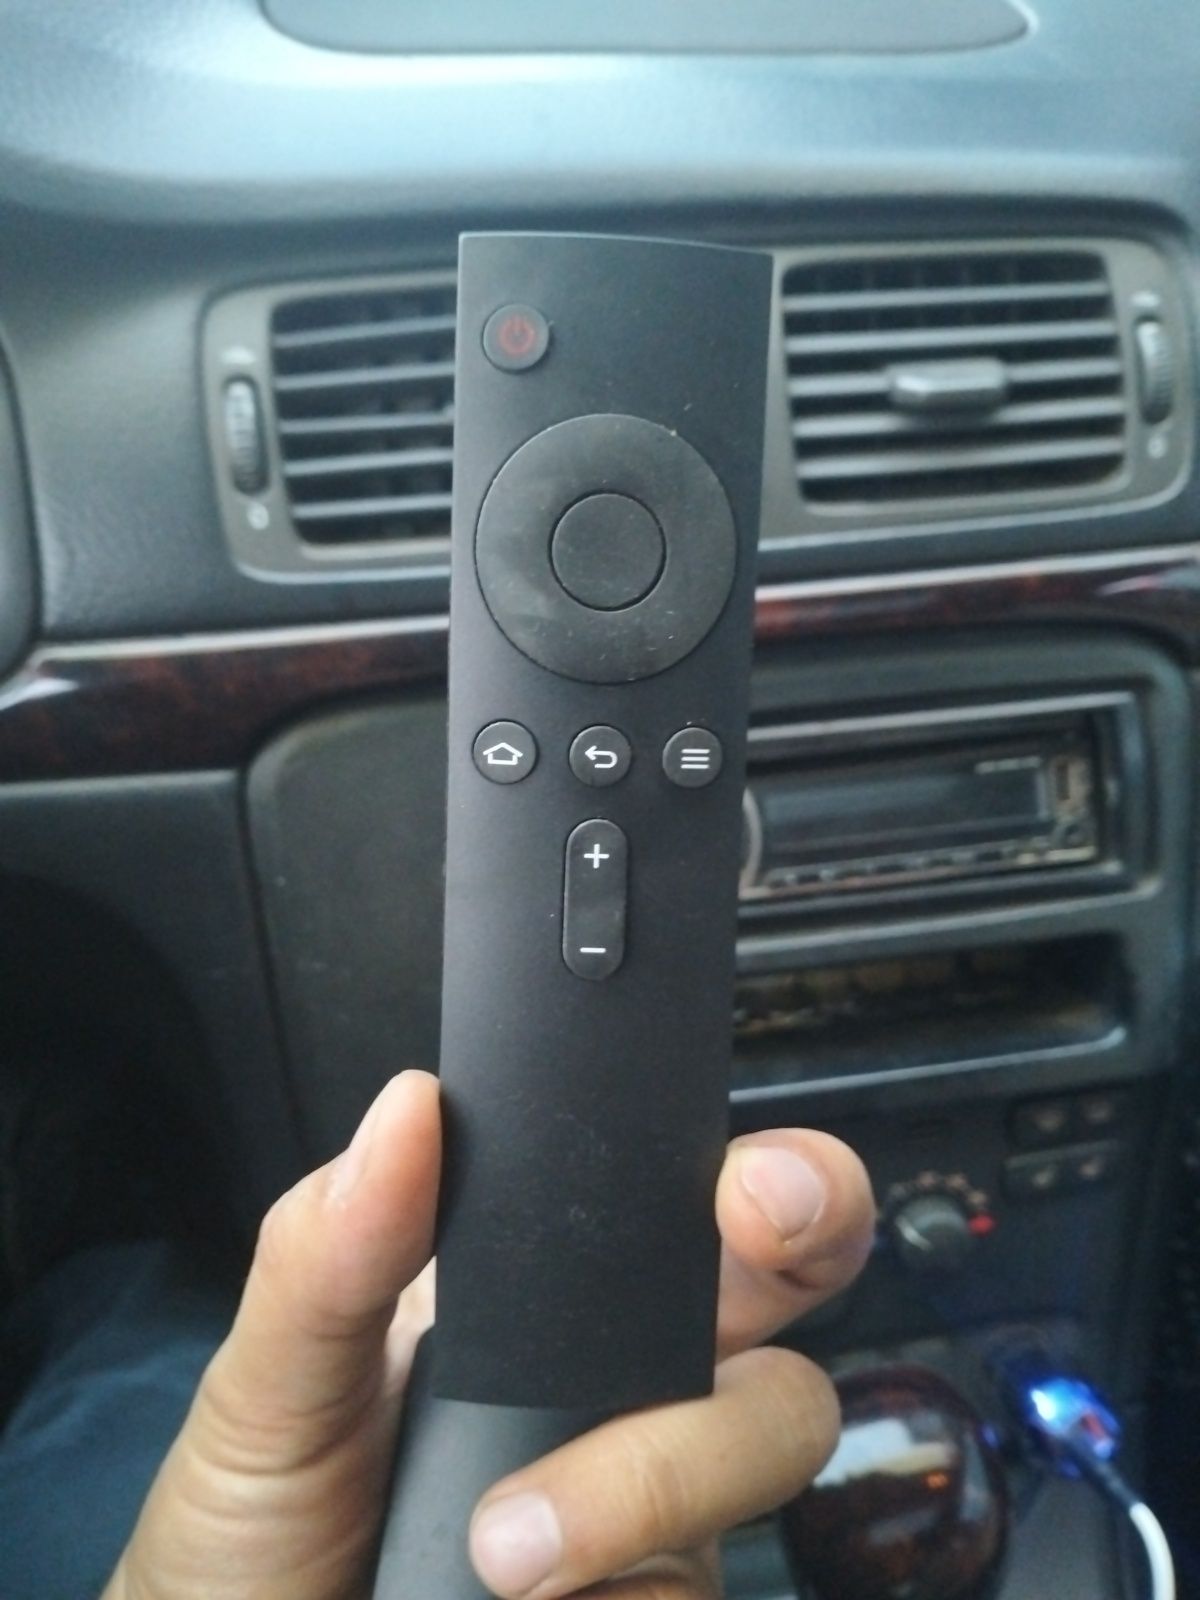 Android TV Stick 2/16